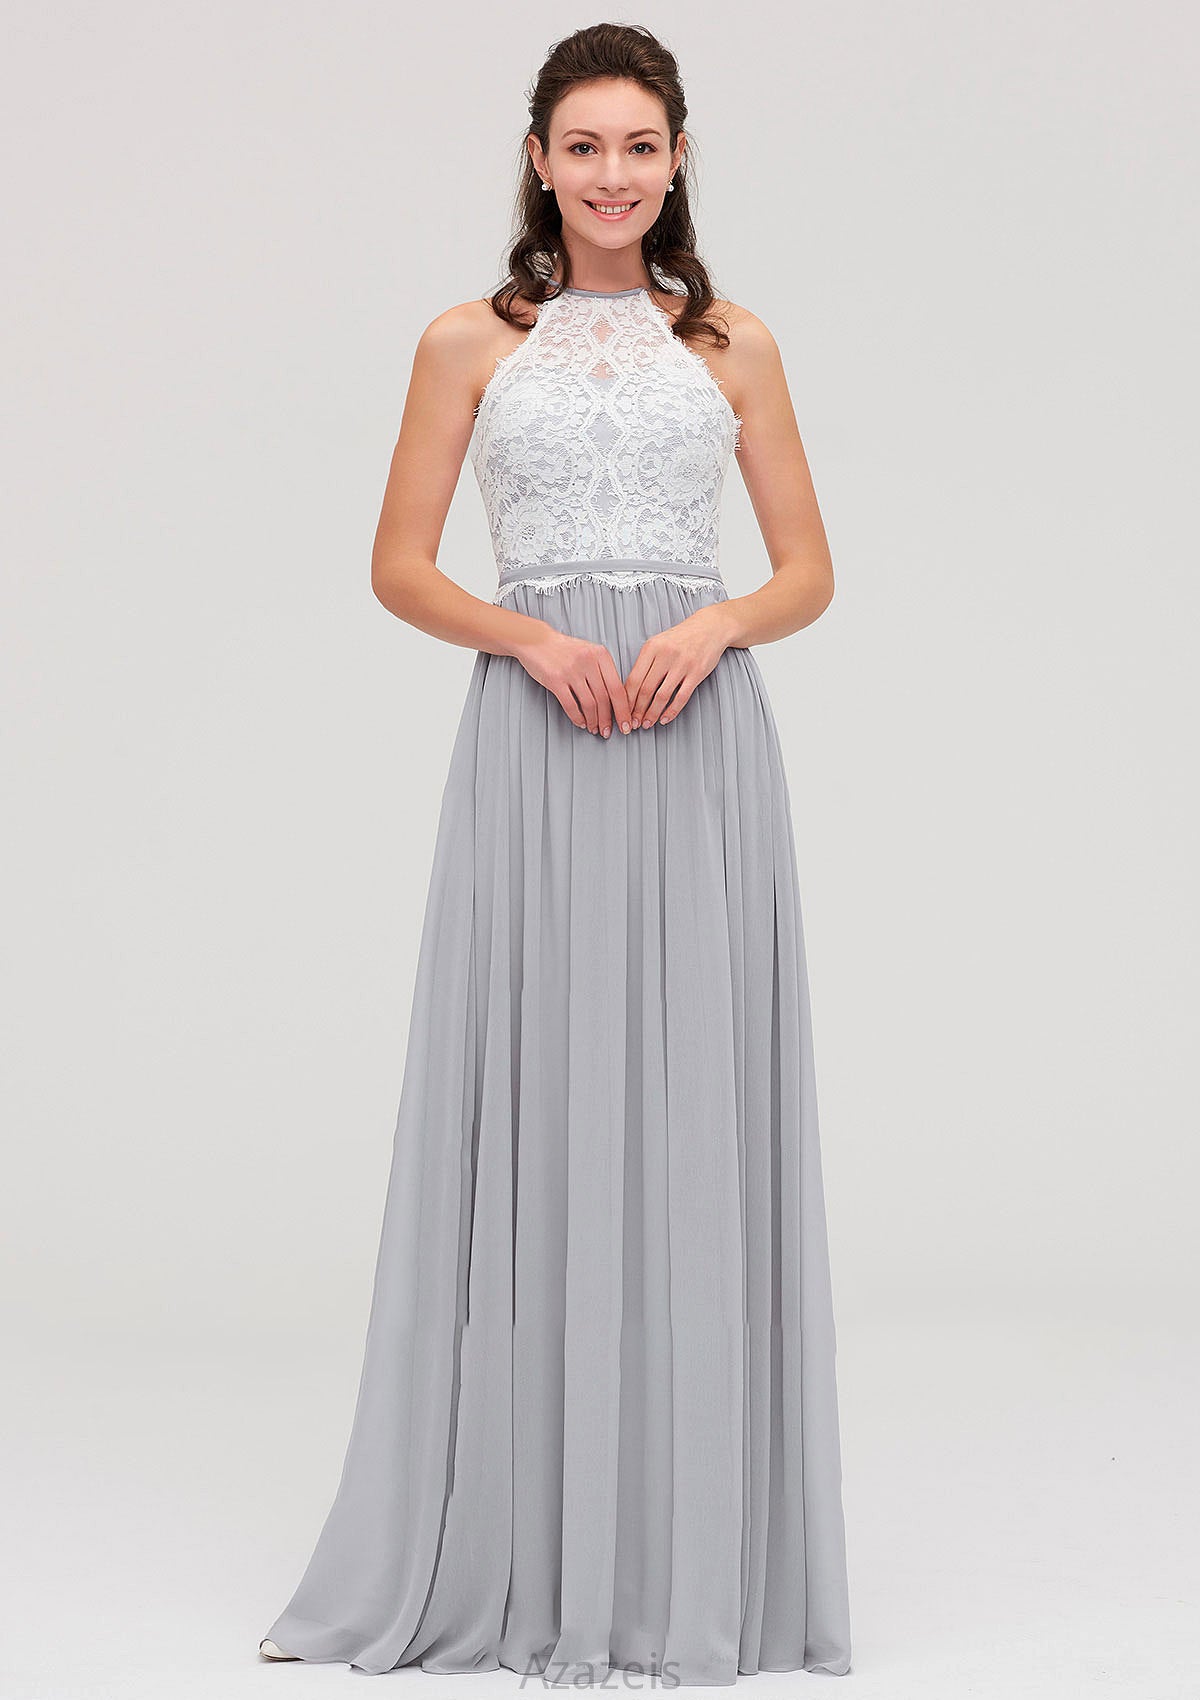 Sleeveless Scoop Neck A-line/Princess Chiffon Long/Floor-Length Bridesmaid Dresseses With Lace Avah DFP0025497